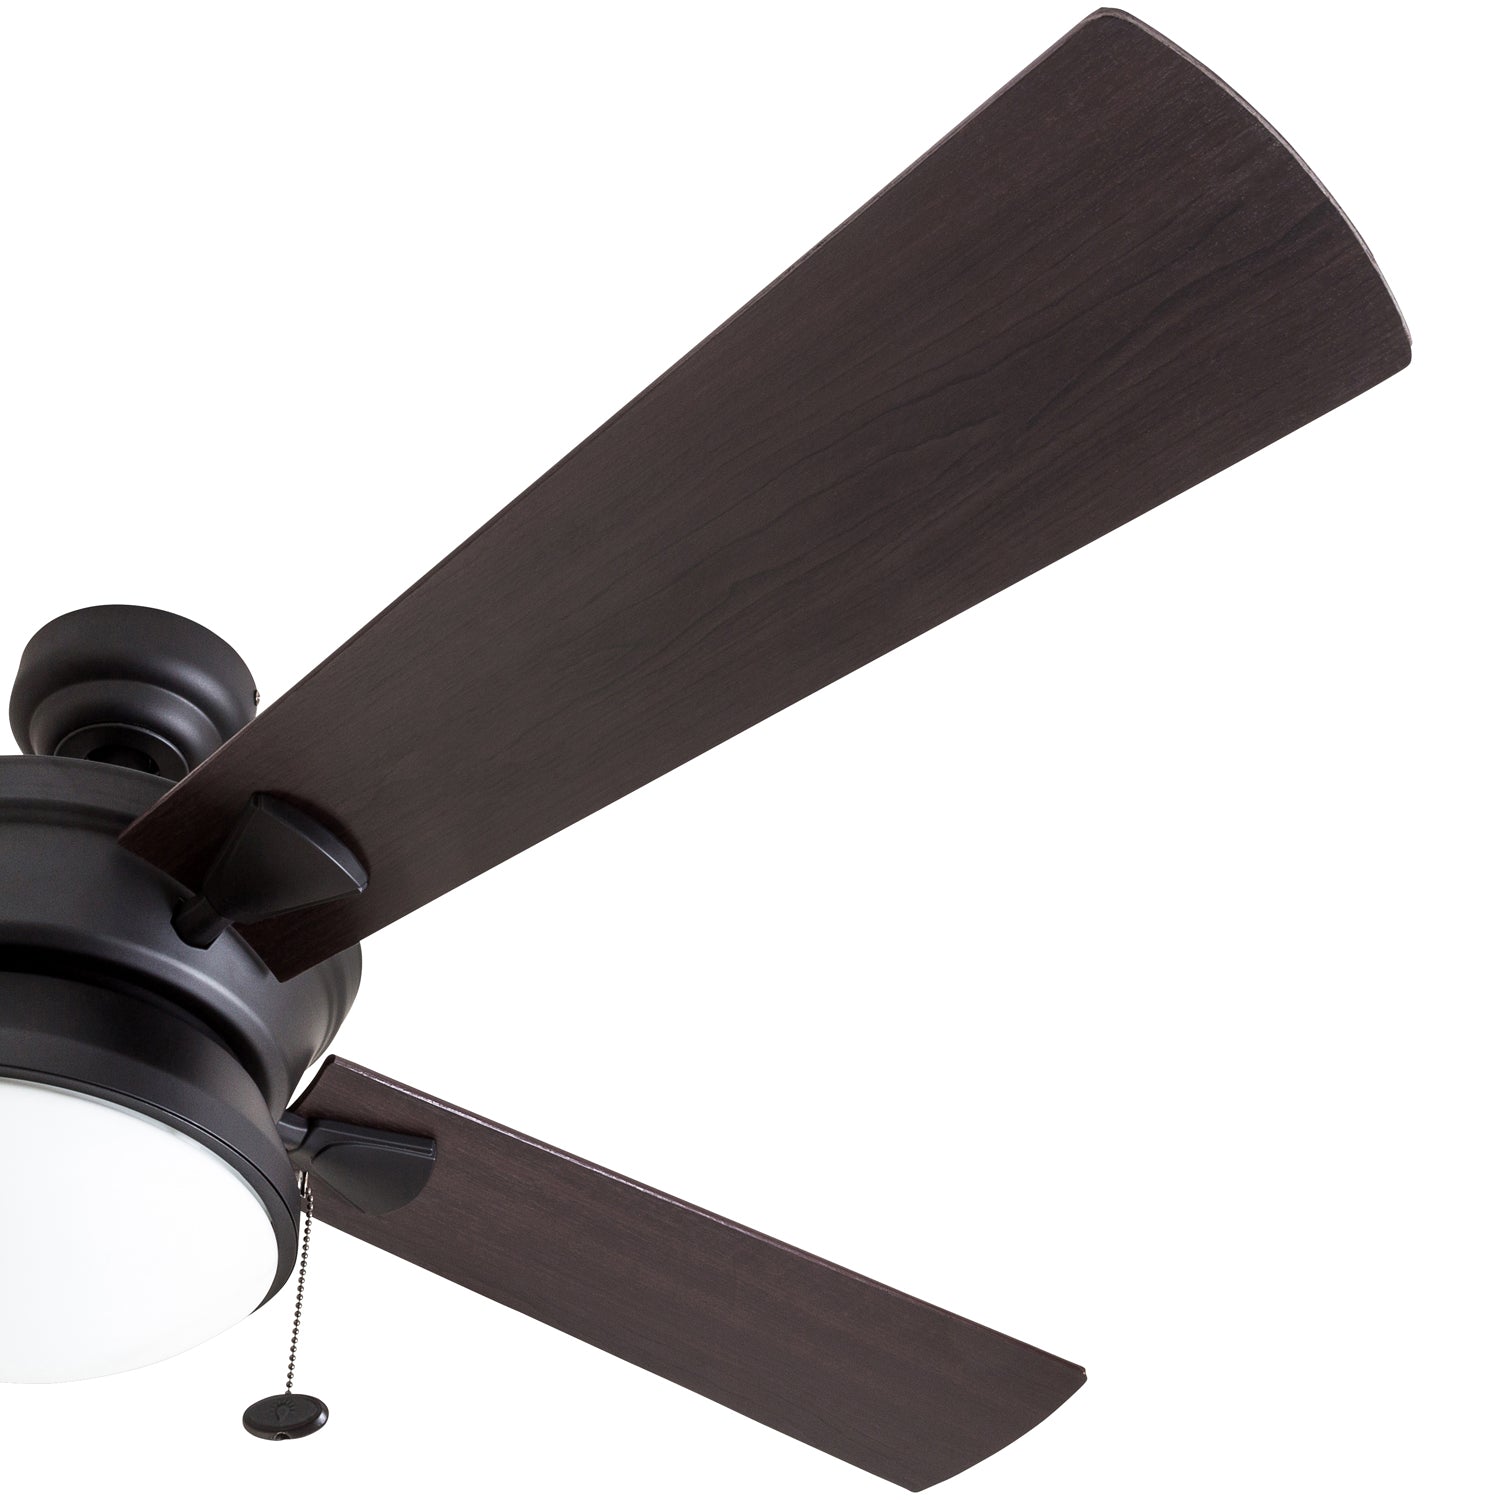 52 Inch Auletta, Matte Black, Pull Chain, Indoor/Outdoor Ceiling Fan by Prominence Home